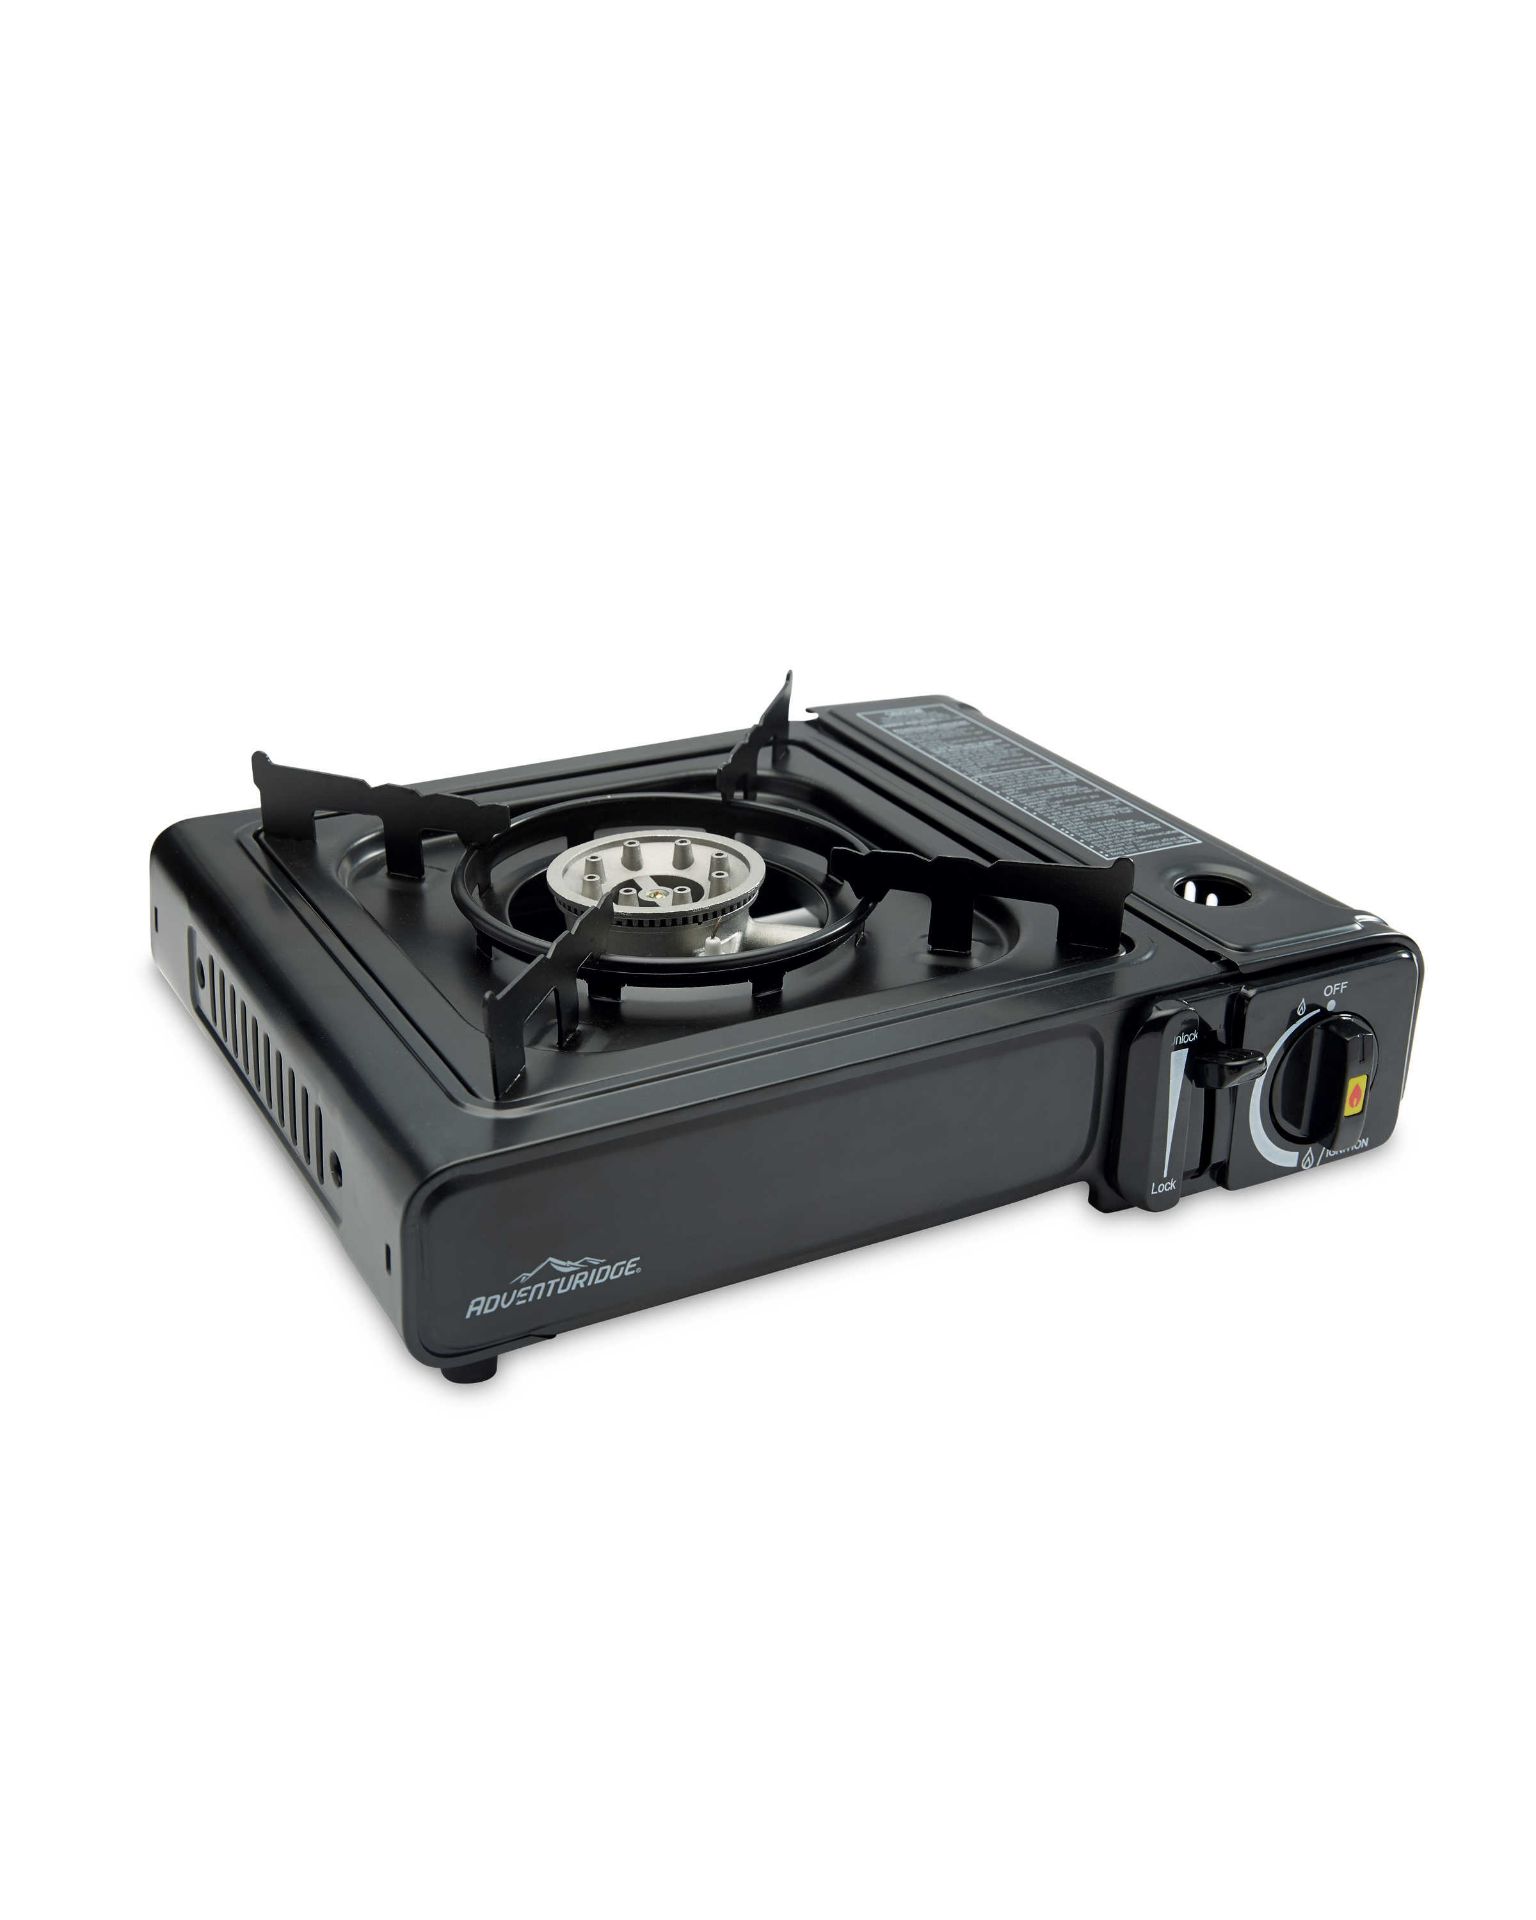 Brand New Lightweight Portable Gas Cooker Includes Carry Case - Drip Pan - Variable Heat Control - - Image 2 of 2